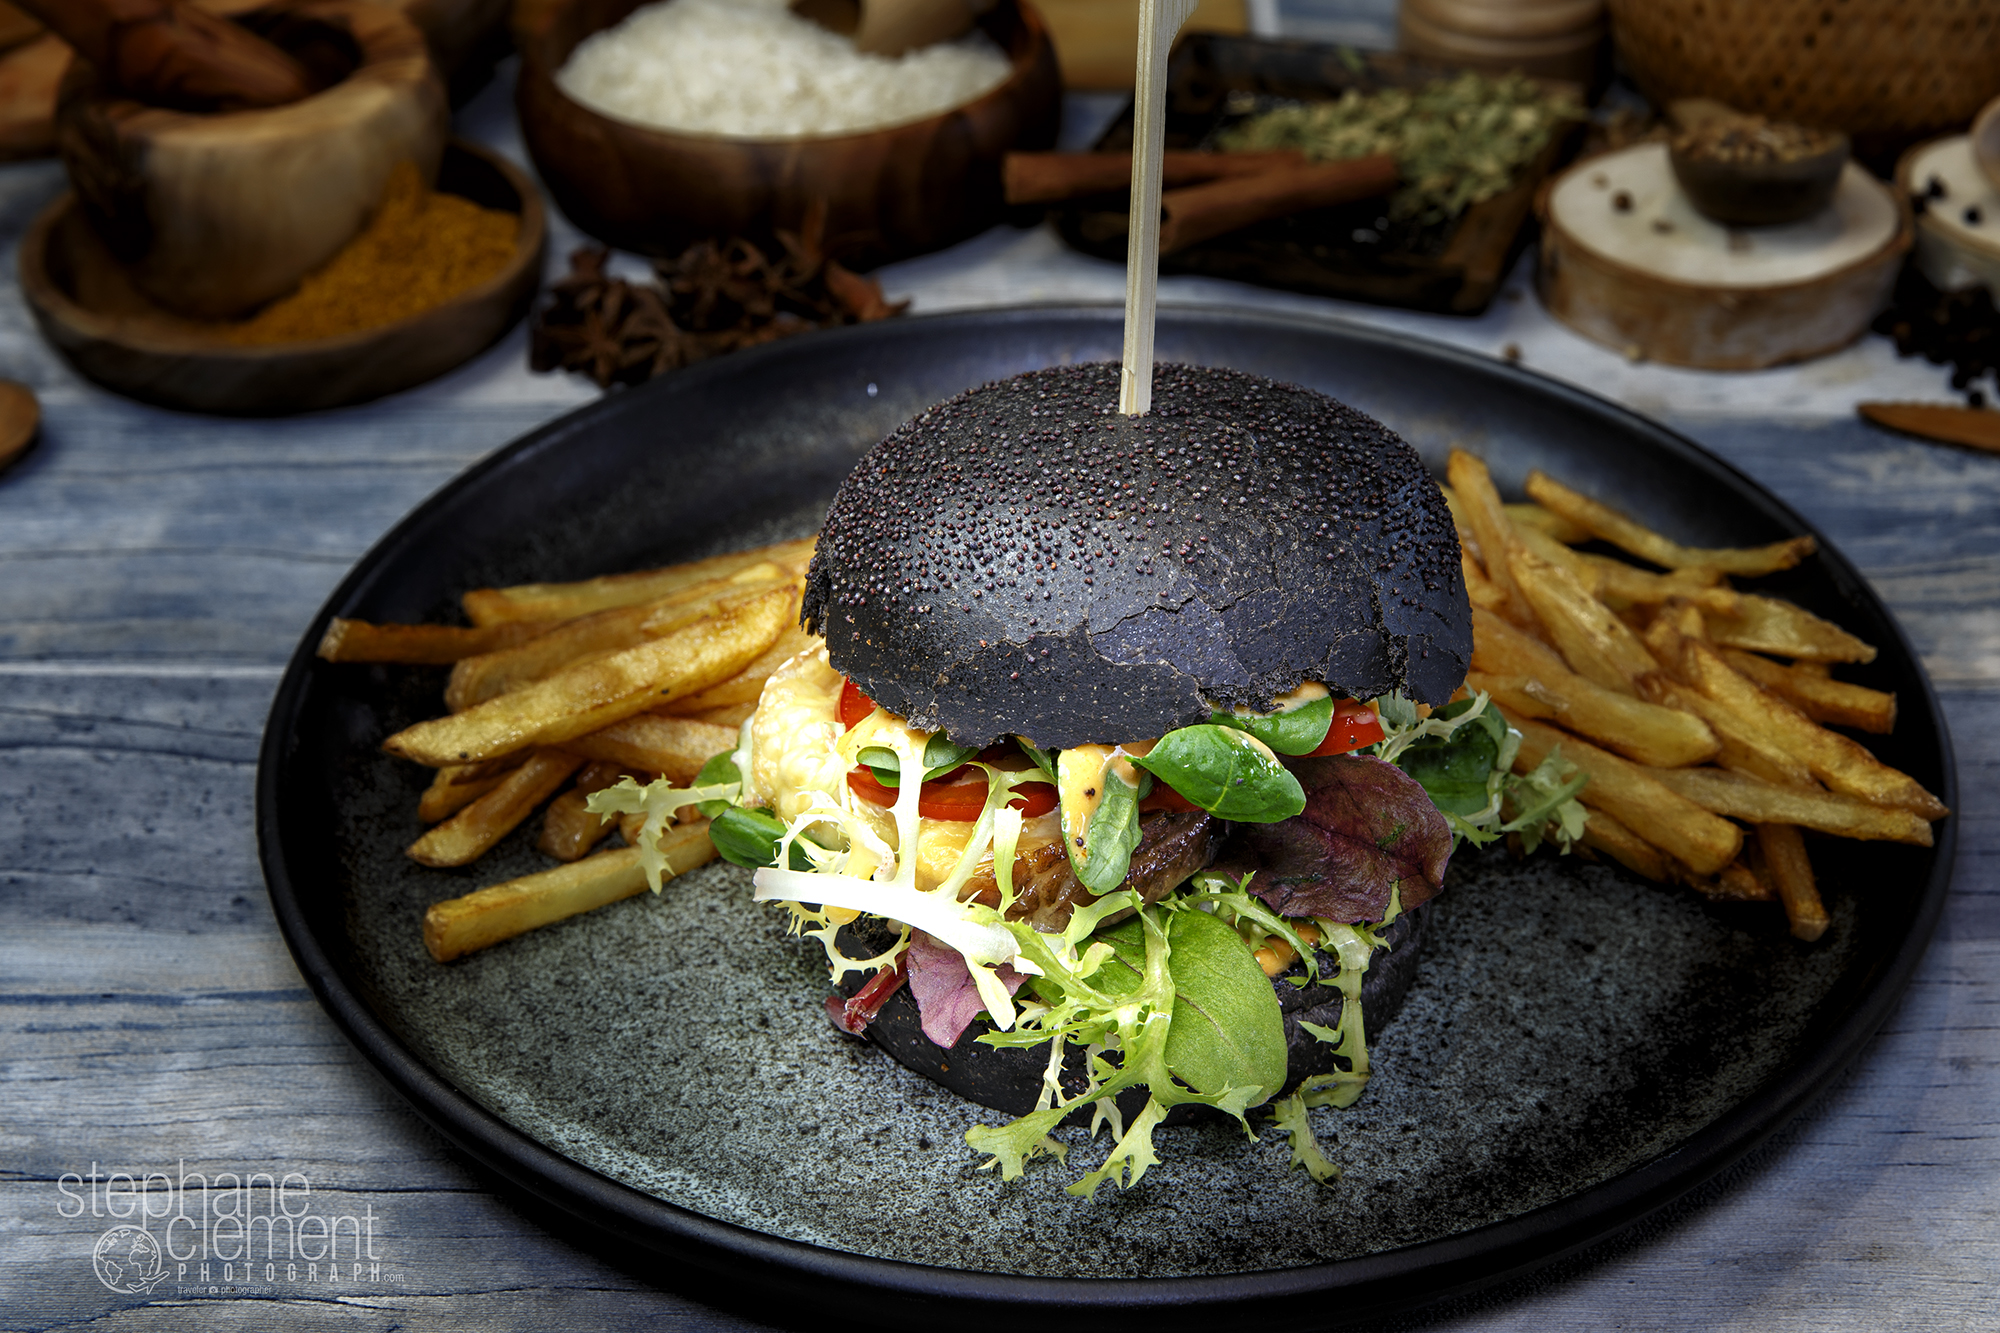 Black Burger with salad, cheese, tomato and beef, accompanied by French fries on a white plate, served on a design plate. Decoration in background with cooking tools.